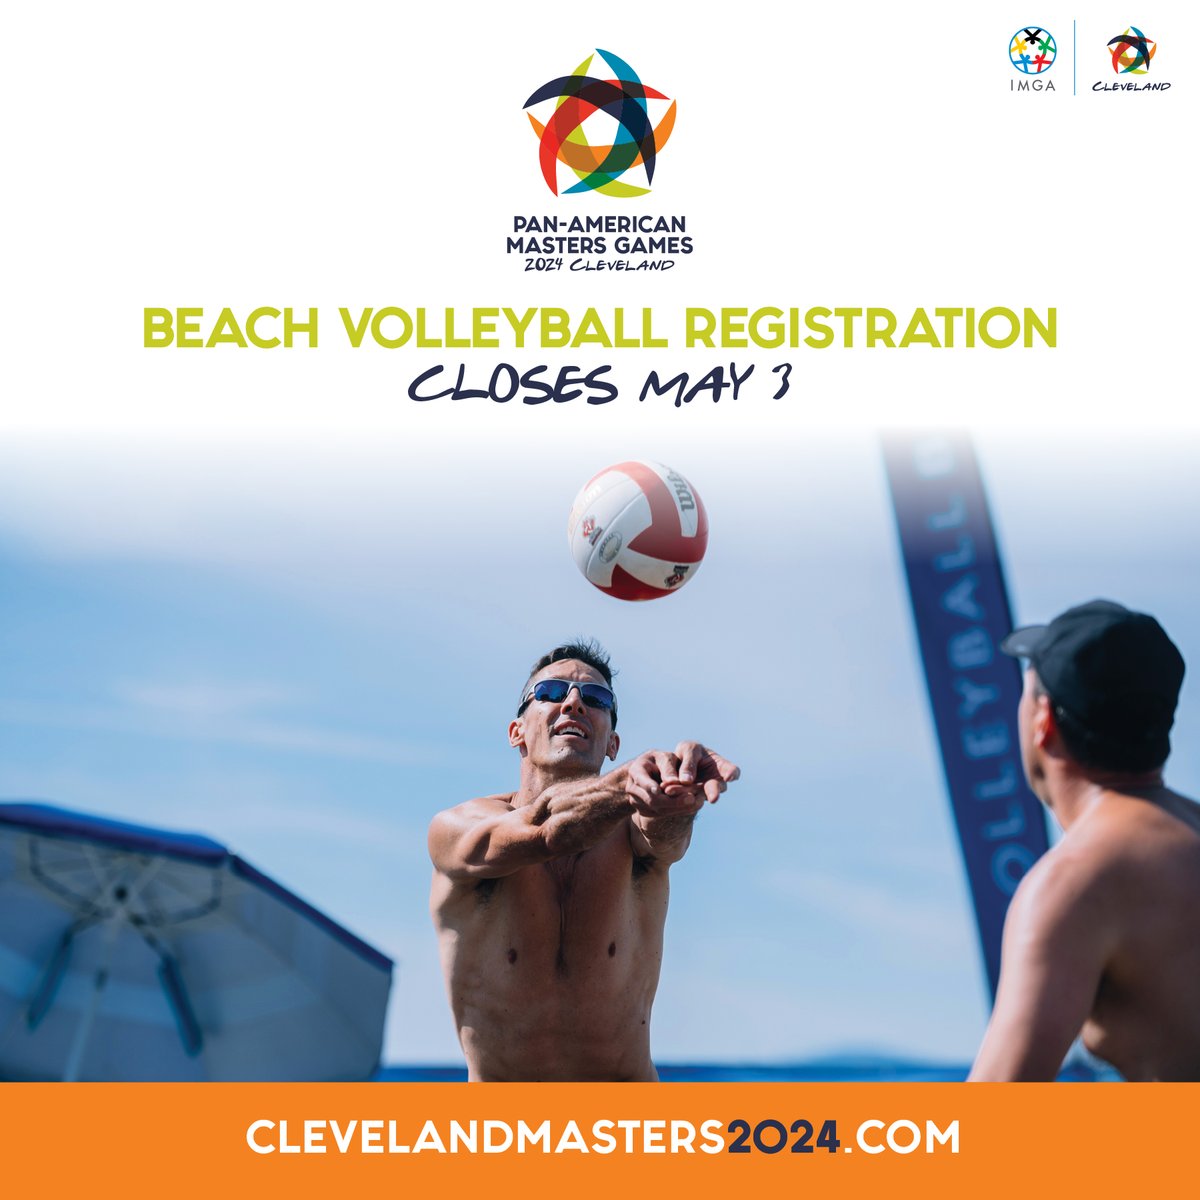 Serve’s up! 🏐🏝 Beach volleyball is the perfect sport to host in Cleveland for the Pan-American Masters Games! The city’s proximity to the water and sandy beaches makes it a prime spot for this popular outdoor sport. Get your squad together and register today:…